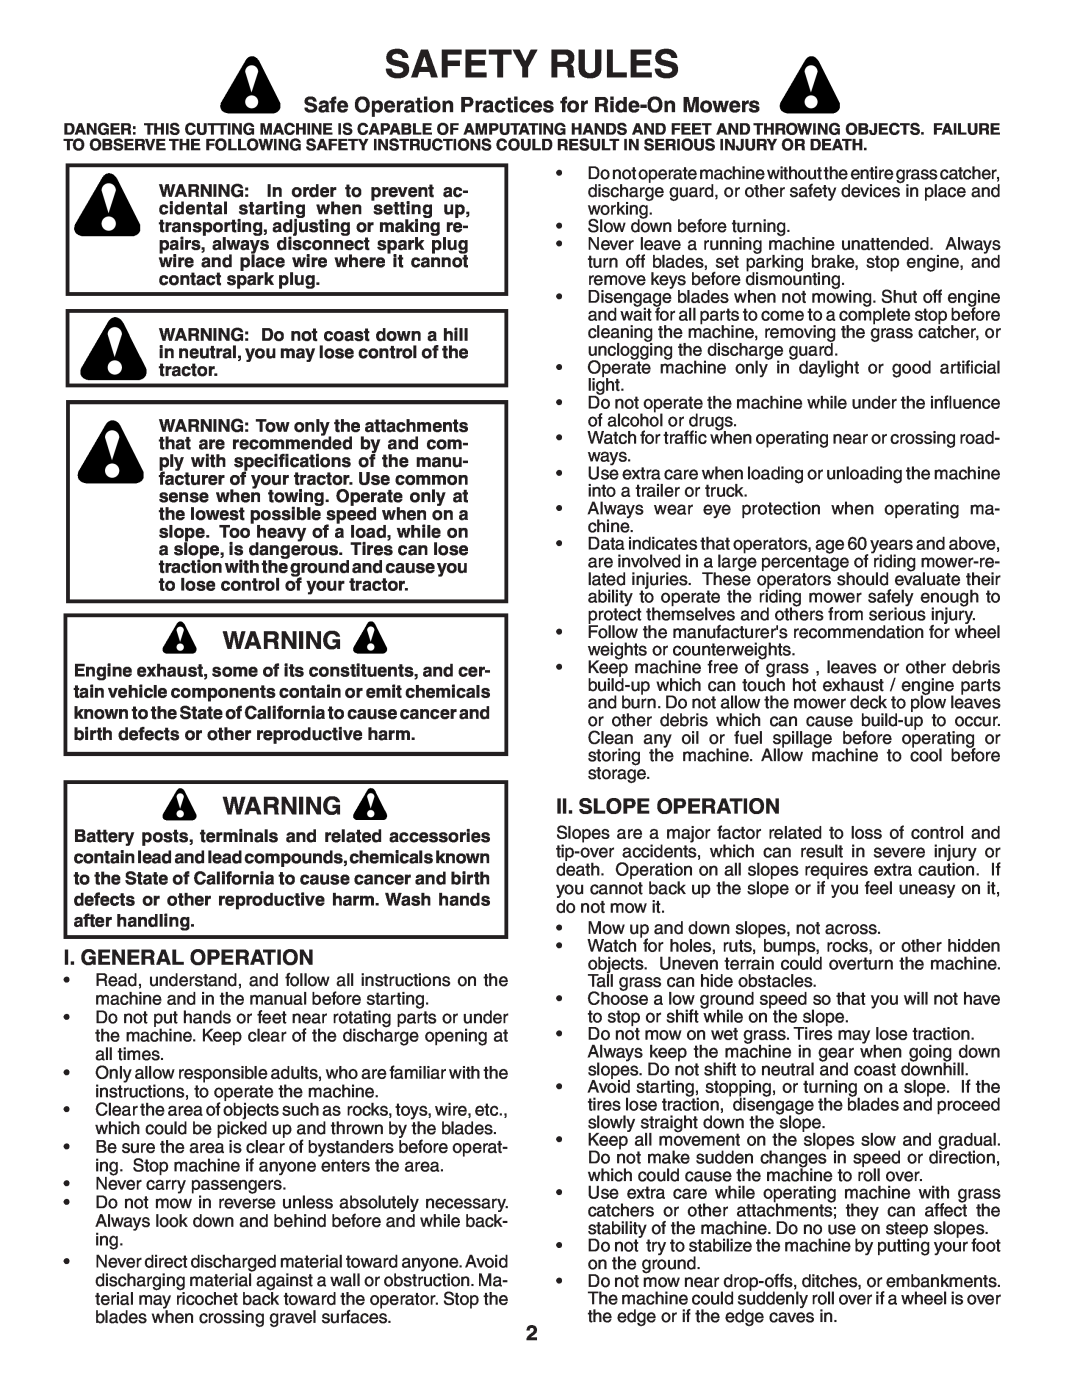 Poulan 403808 manual Safety Rules, Safe Operation Practices for Ride-On Mowers, I. General Operation, Ii. Slope Operation 